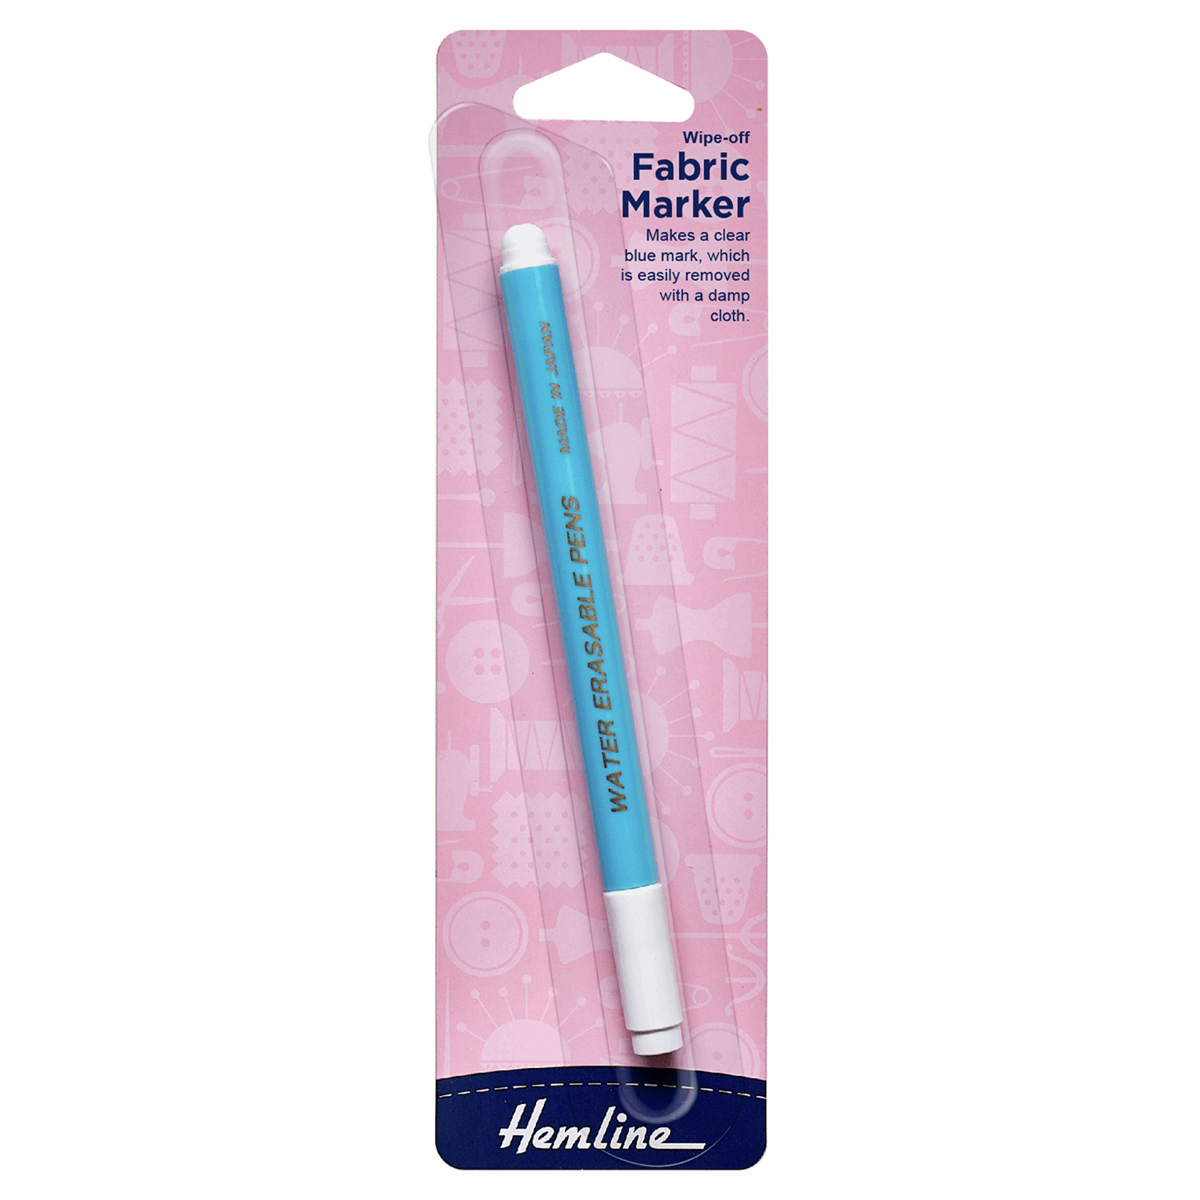 Hemline wipe off wash out fabric marking pen: sewing, quilting, embroidery.